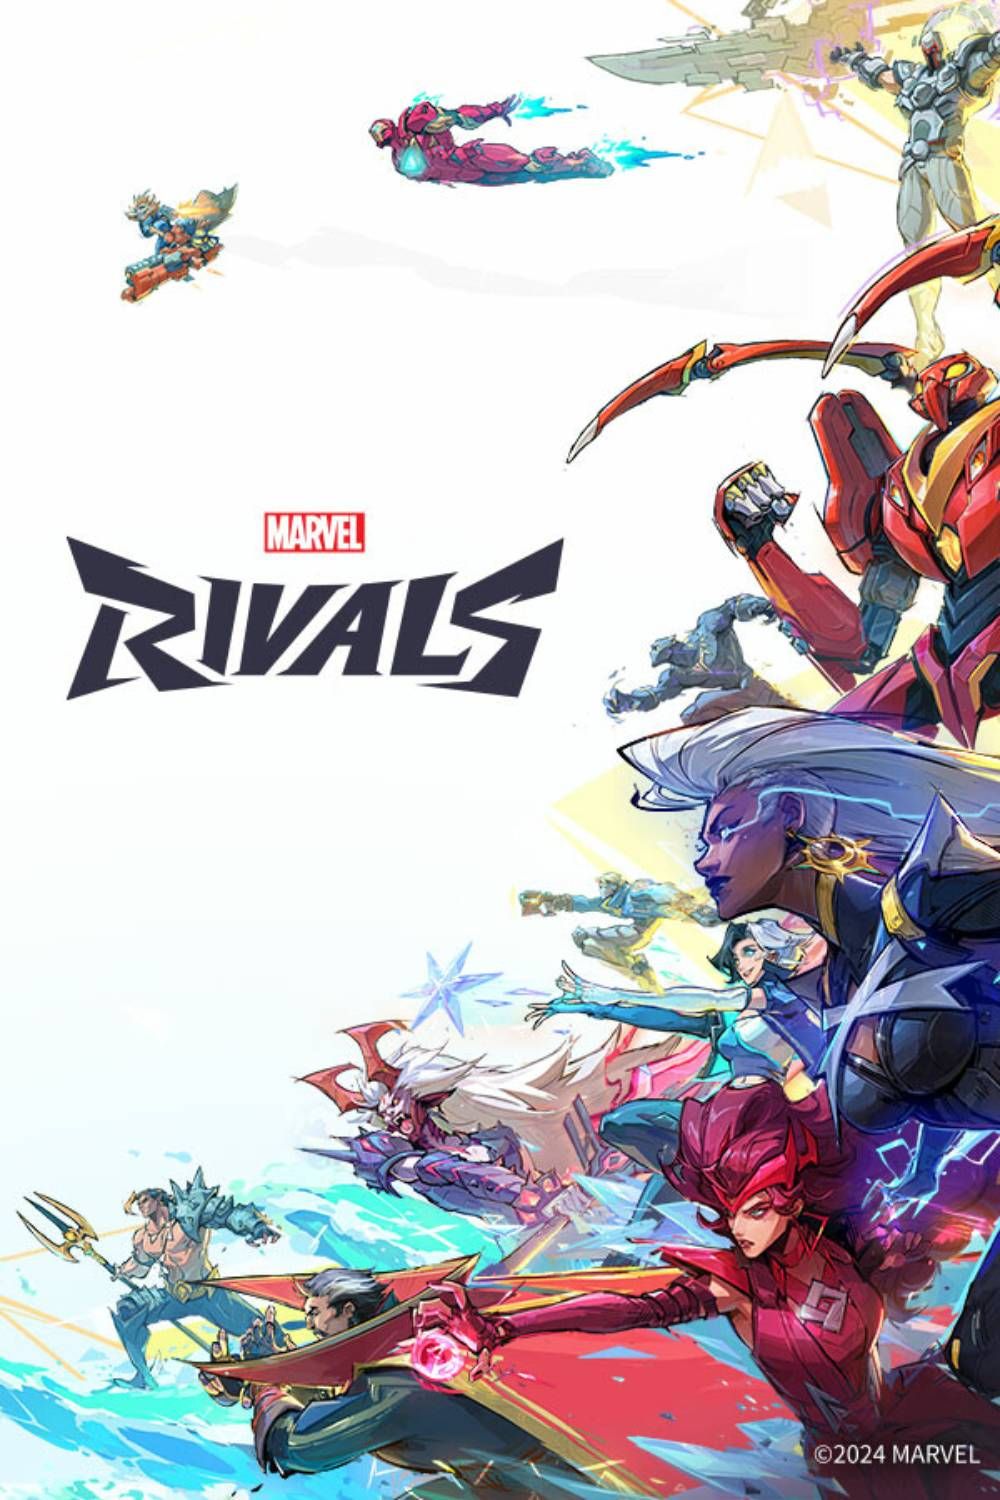 Marvel Rivals Tag Page Cover Art